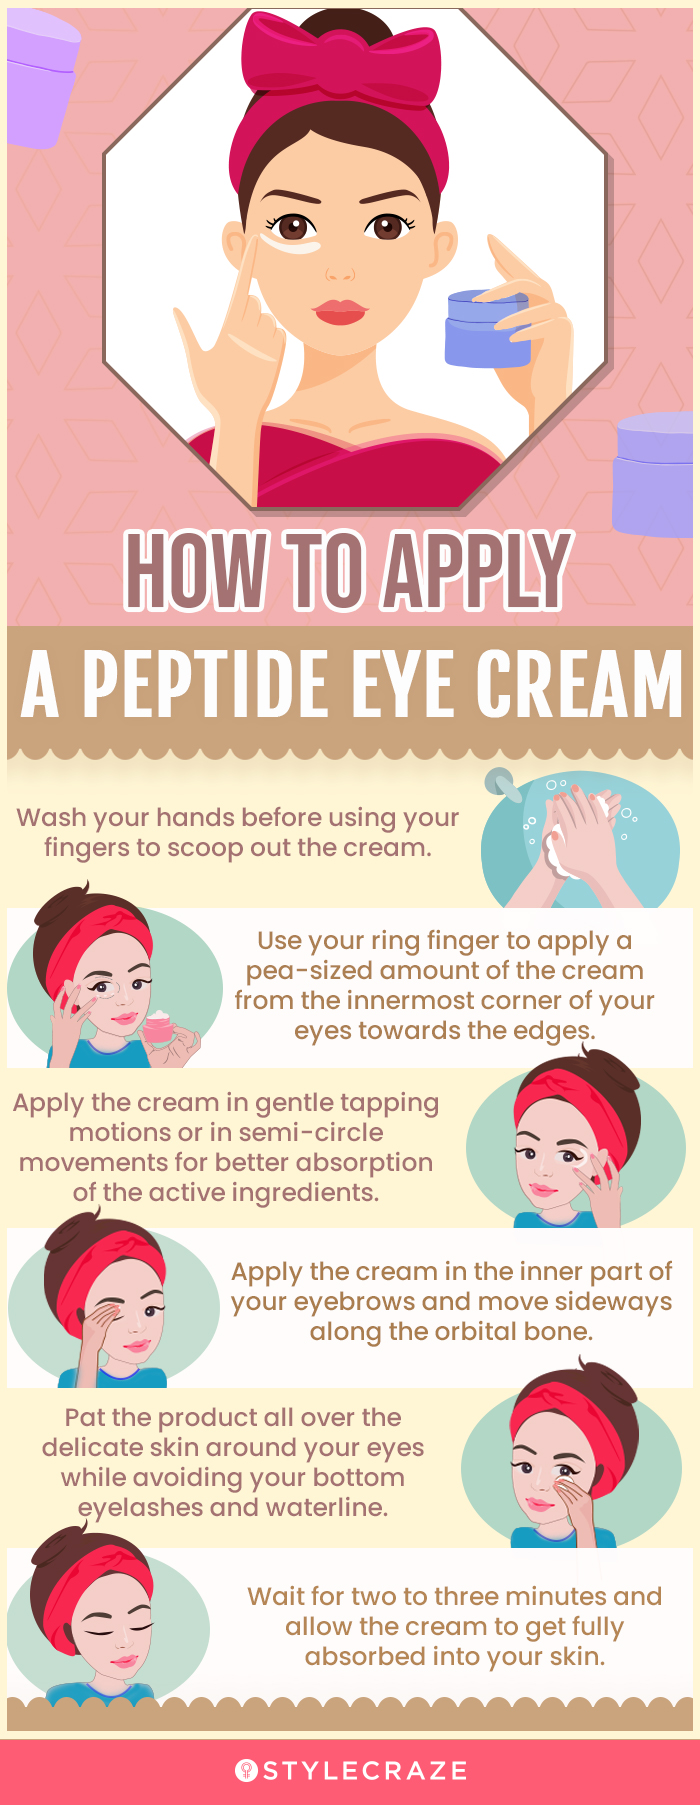 How to apply A Peptide Eye Cream (infographic)